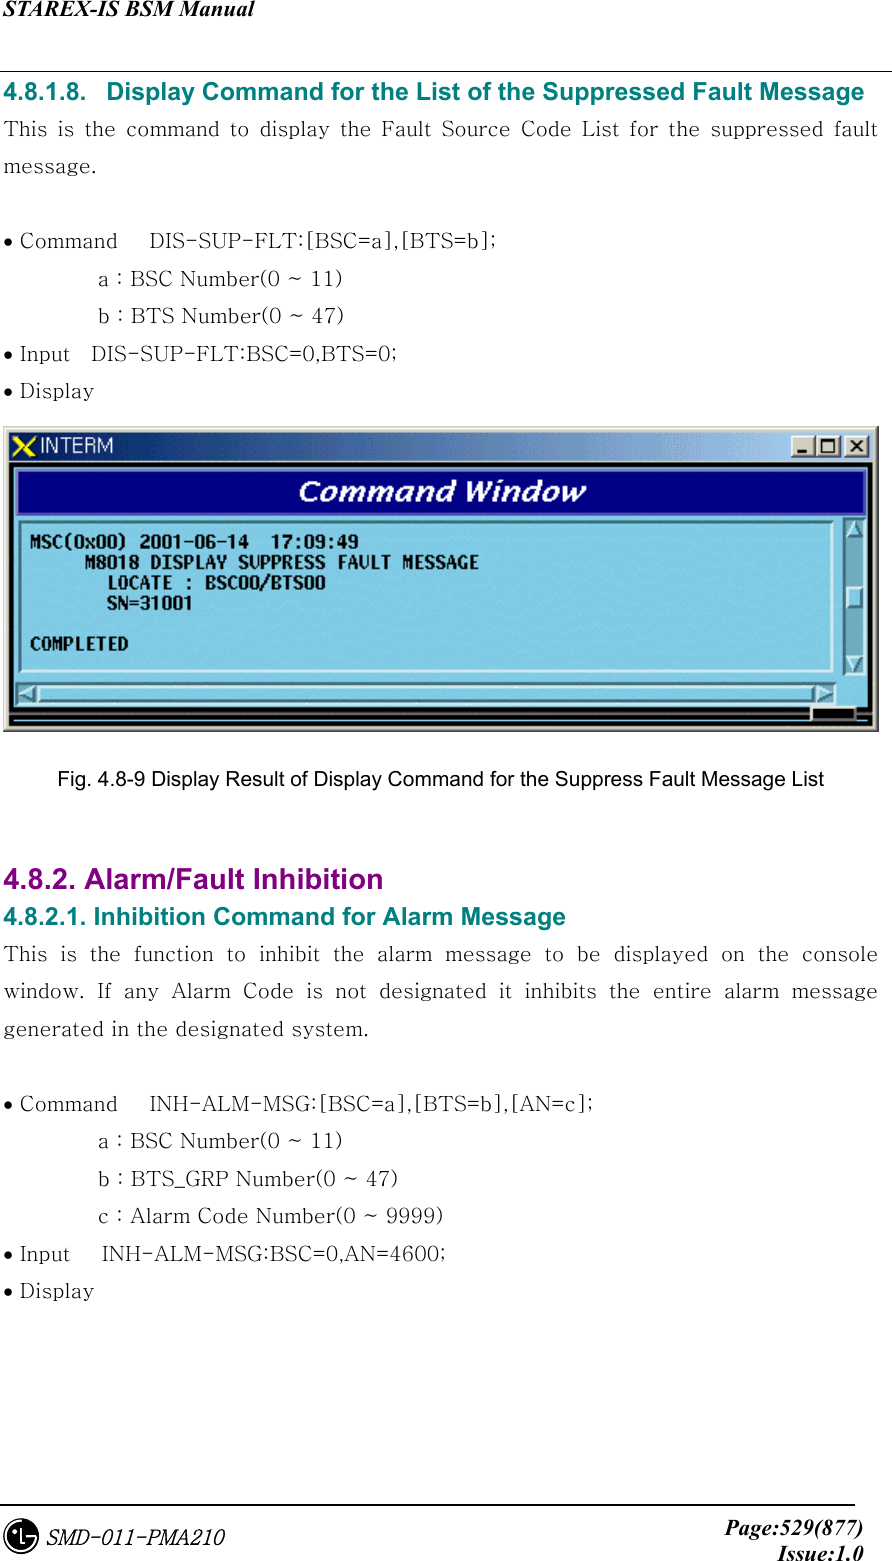 STAREX-IS BSM Manual     Page:529(877)Issue:1.0SMD-011-PMA210 4.8.1.8.   Display Command for the List of the Suppressed Fault Message This is the command to display the Fault Source Code List for the  suppressed  fault message.  • Command   DIS-SUP-FLT:[BSC=a],[BTS=b];          a : BSC Number(0 ~ 11)          b : BTS Number(0 ~ 47) • Input    DIS-SUP-FLT:BSC=0,BTS=0; • Display  Fig. 4.8-9 Display Result of Display Command for the Suppress Fault Message List    4.8.2. Alarm/Fault Inhibition 4.8.2.1. Inhibition Command for Alarm Message This  is  the  function  to  inhibit  the  alarm  message  to  be  displayed on the console window. If any Alarm Code is not designated it inhibits the entire  alarm  message generated in the designated system.  • Command   INH-ALM-MSG:[BSC=a],[BTS=b],[AN=c];            a : BSC Number(0 ~ 11)          b : BTS_GRP Number(0 ~ 47)          c : Alarm Code Number(0 ~ 9999) • Input   INH-ALM-MSG:BSC=0,AN=4600; • Display   